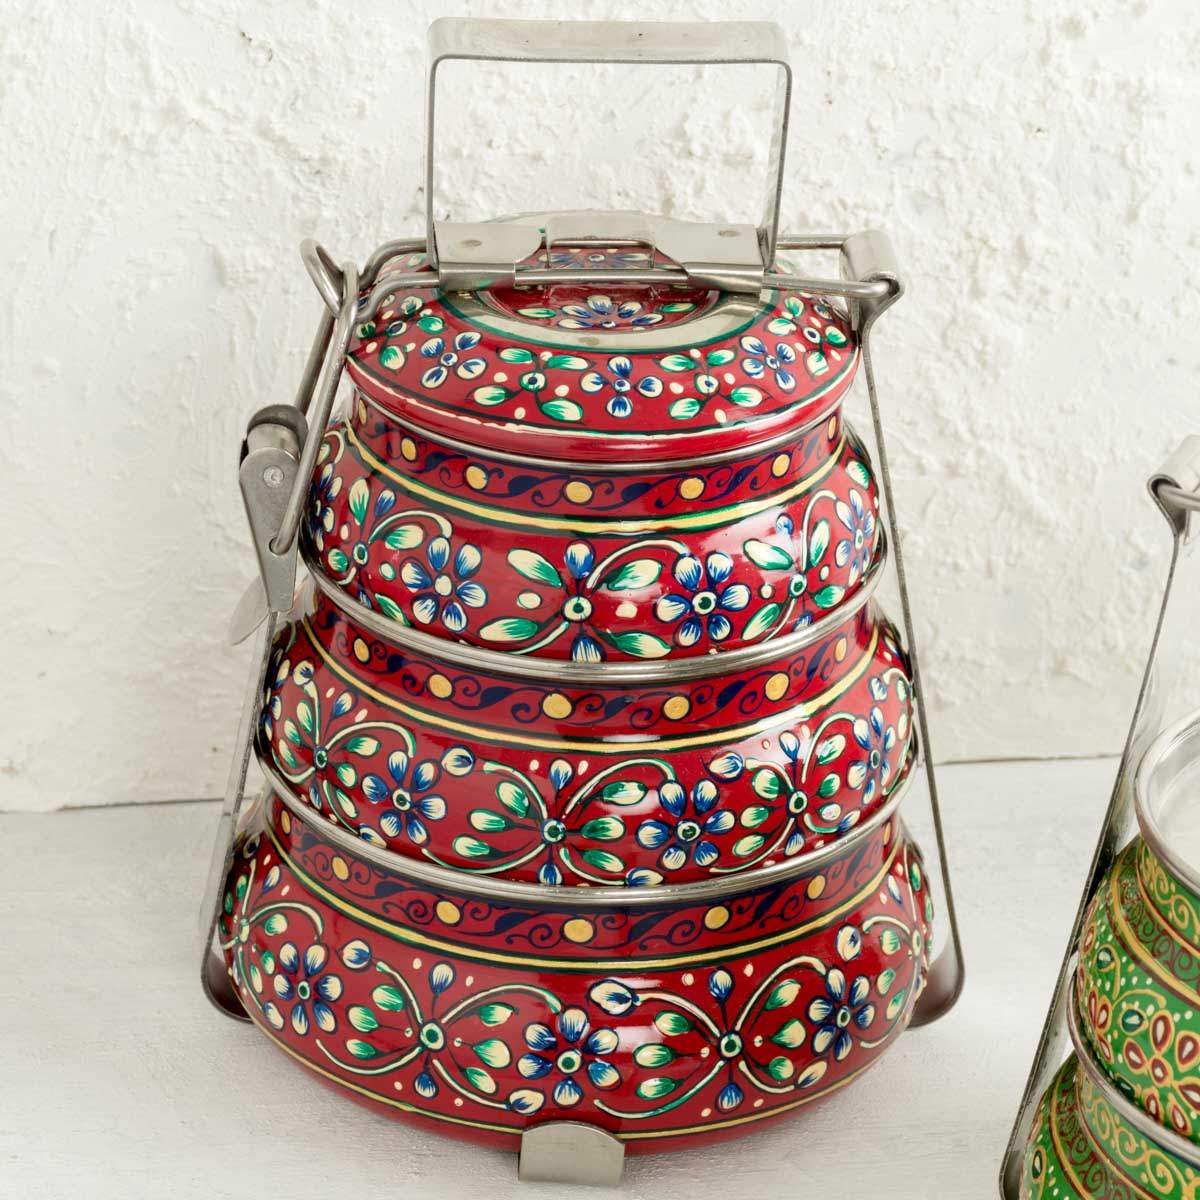 Tiffin Box with Three Tiers